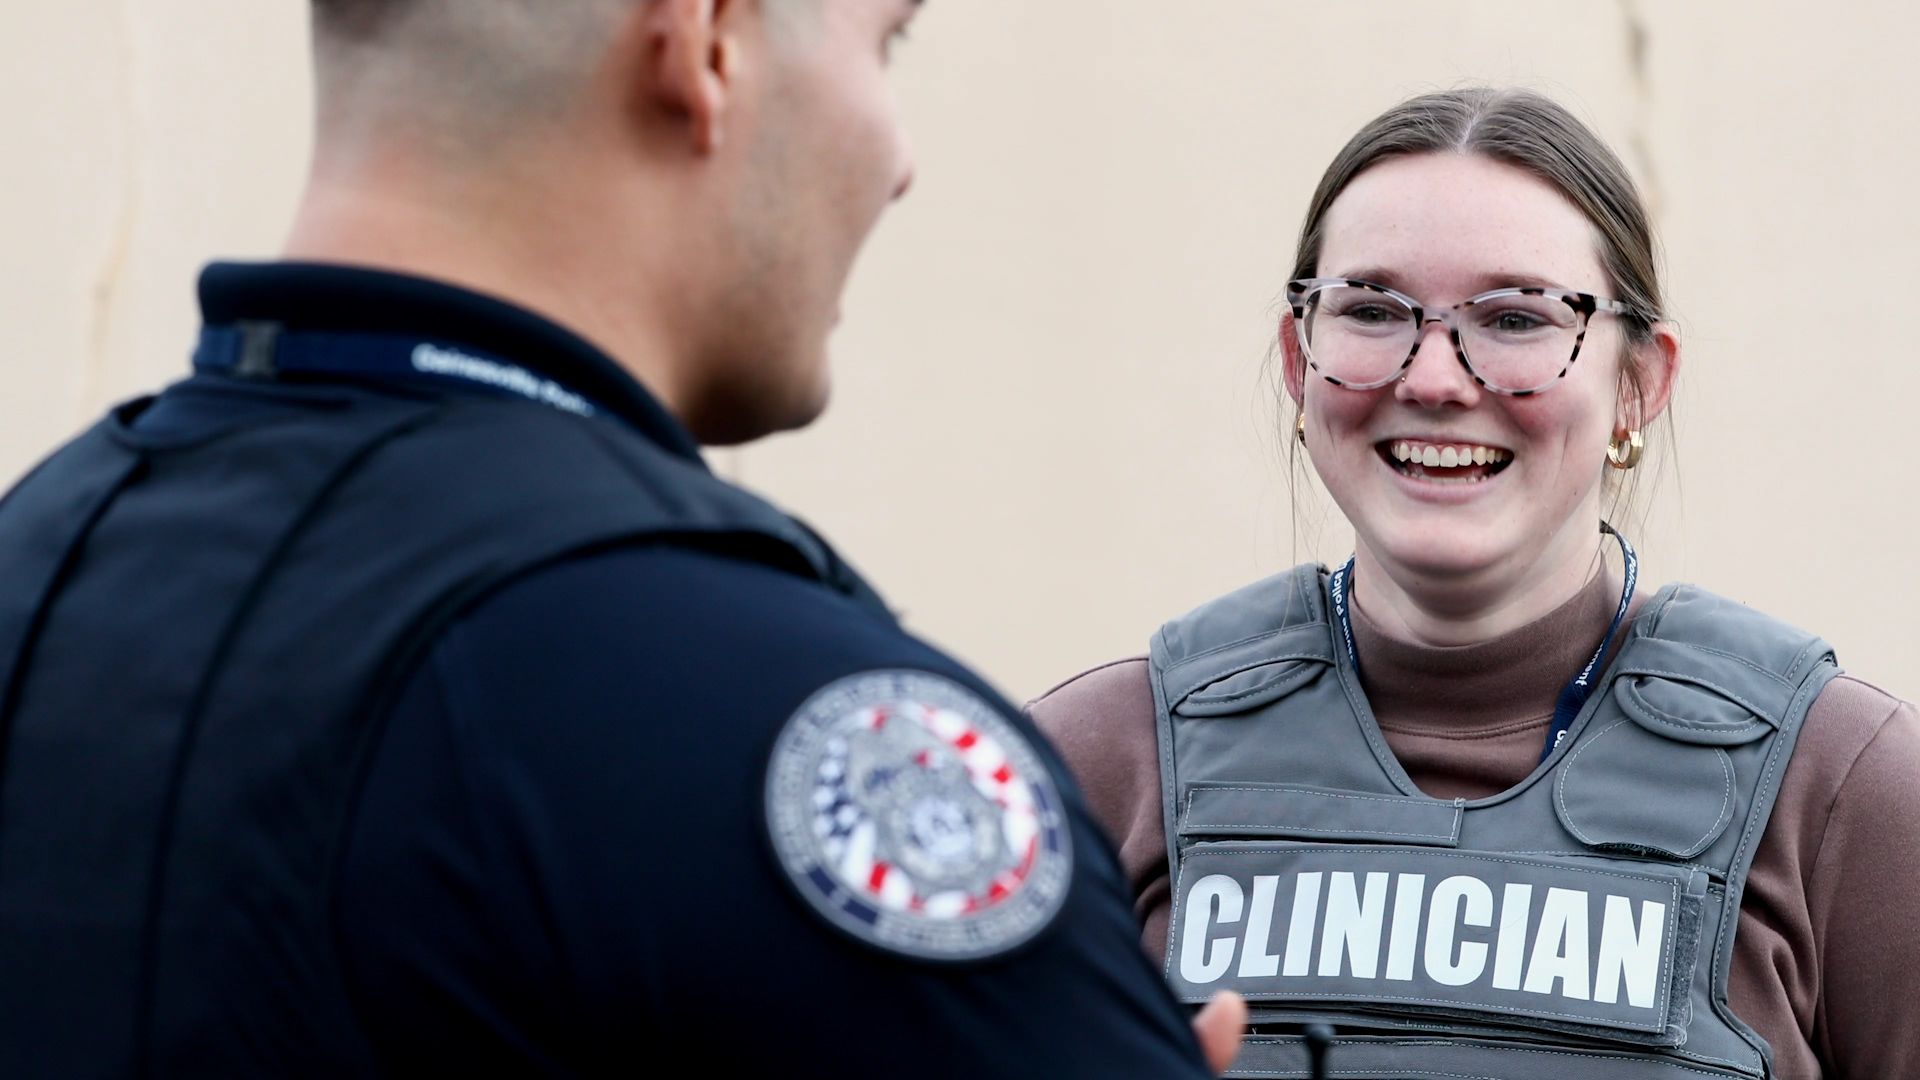 A clinician with a GPD officer